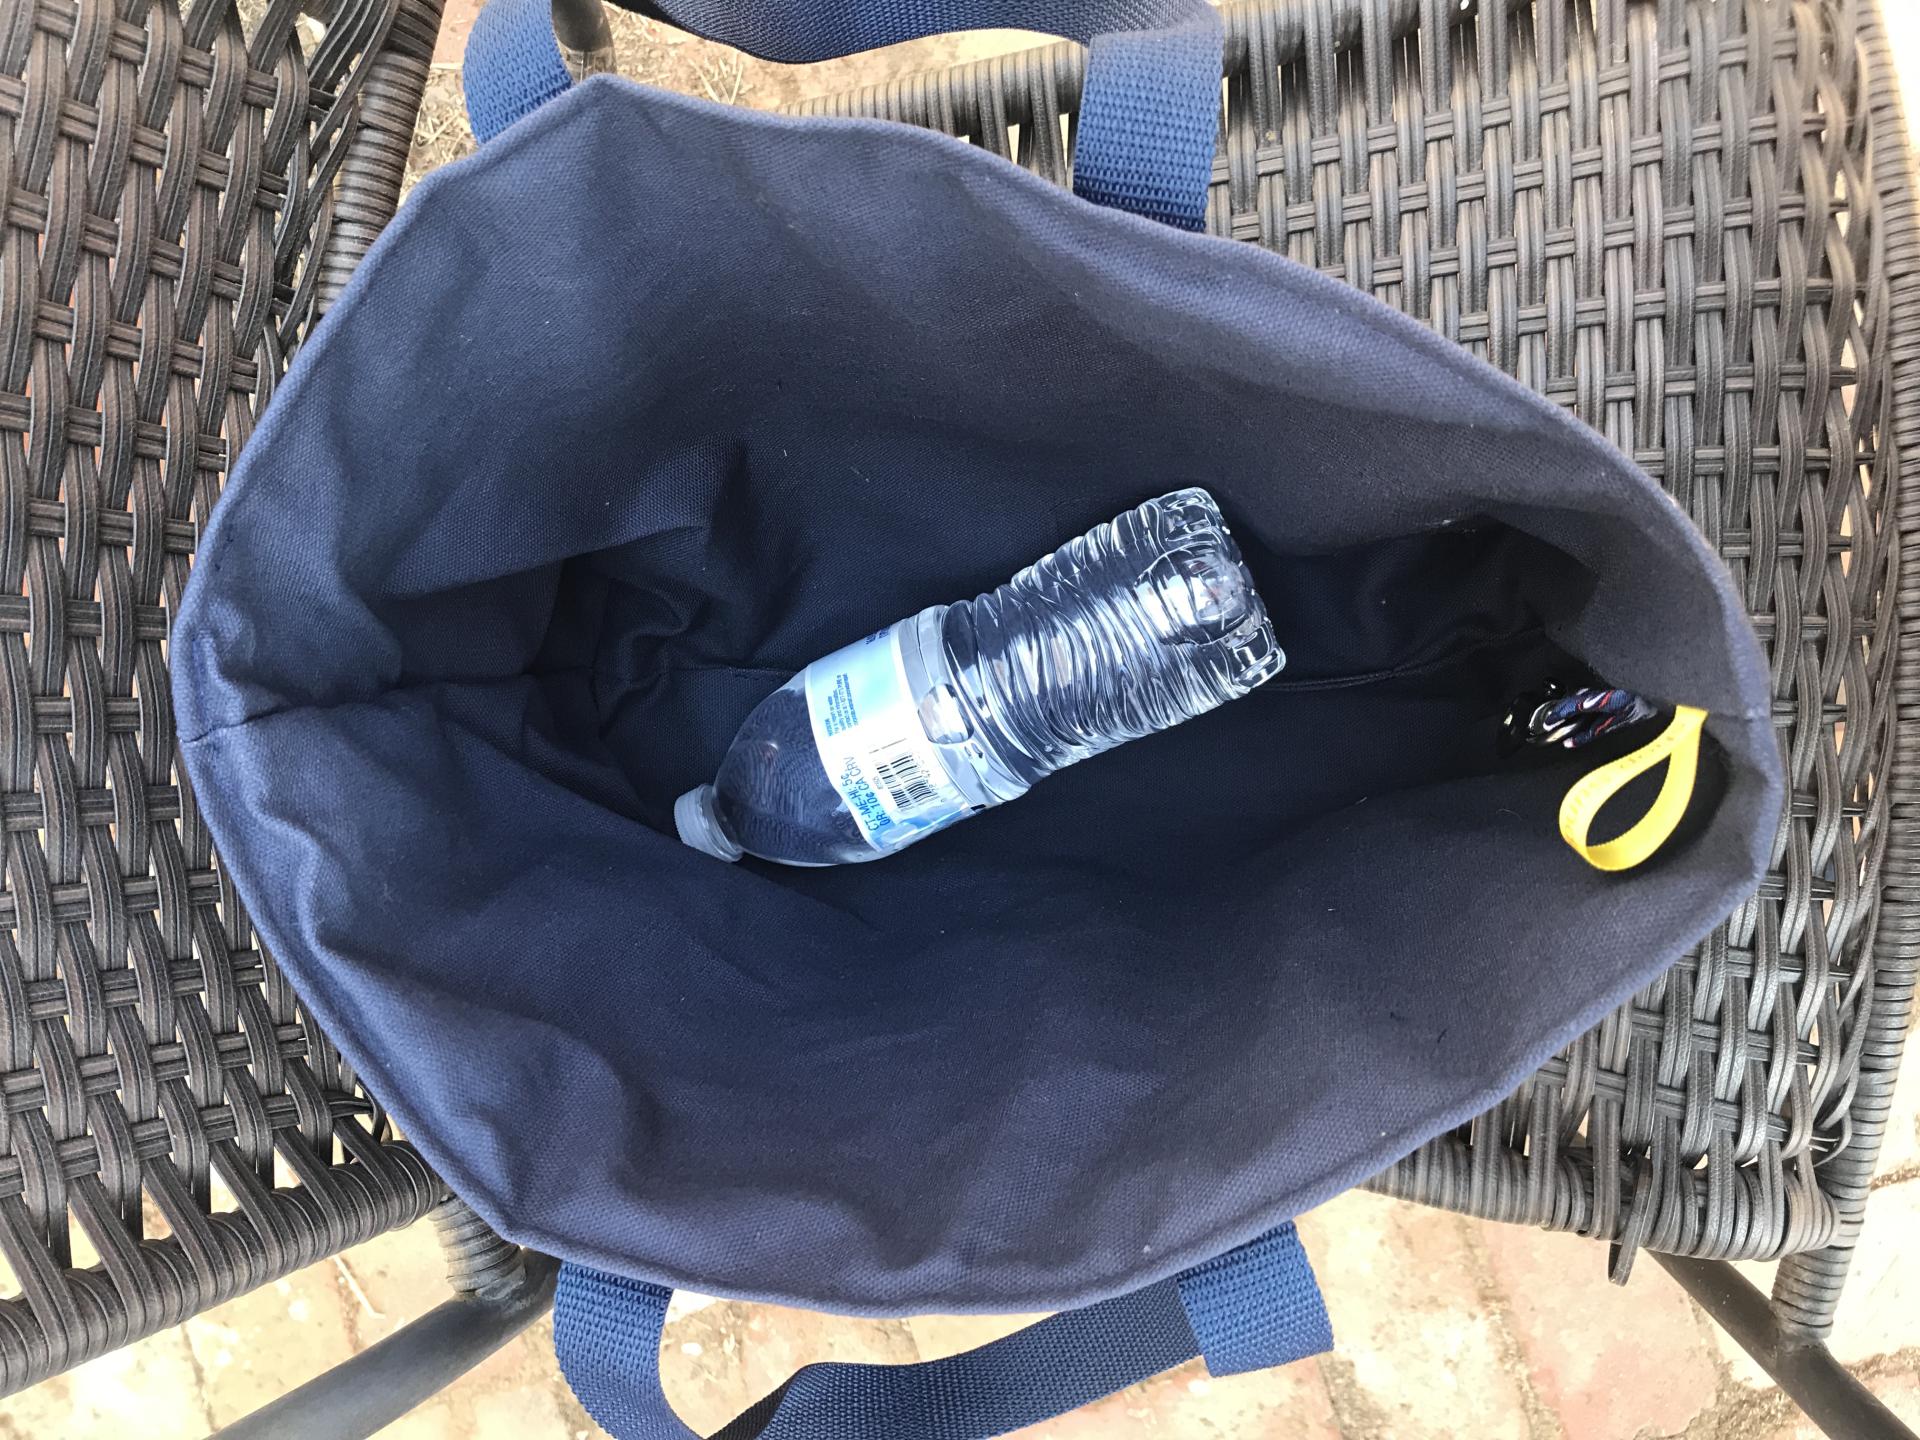 Water bottle (not included) shows scale of bag